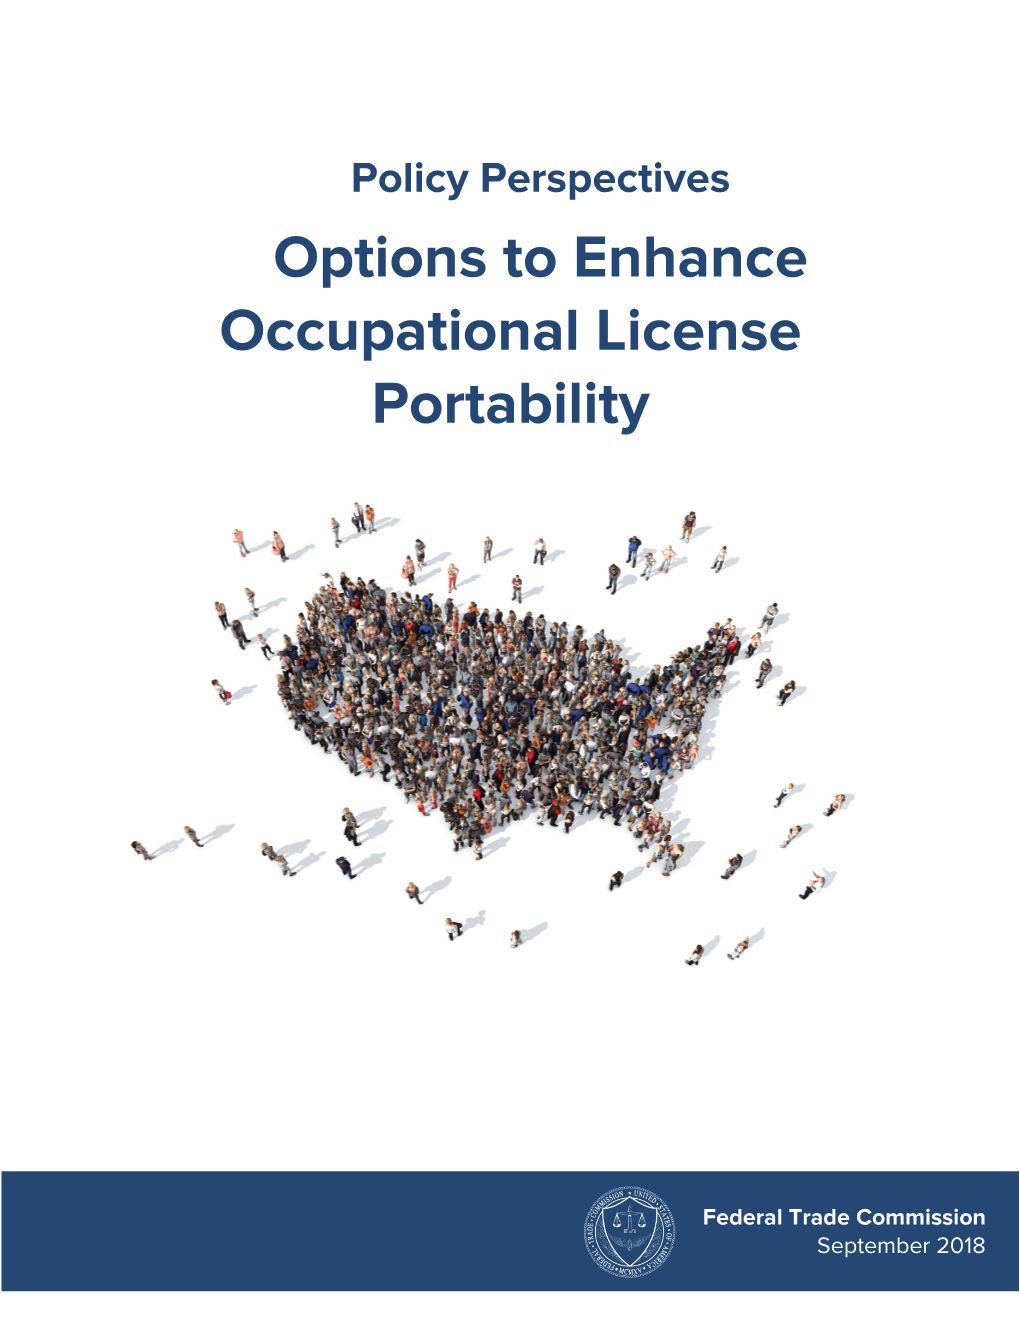 Options to Enhance Occupational License Portability